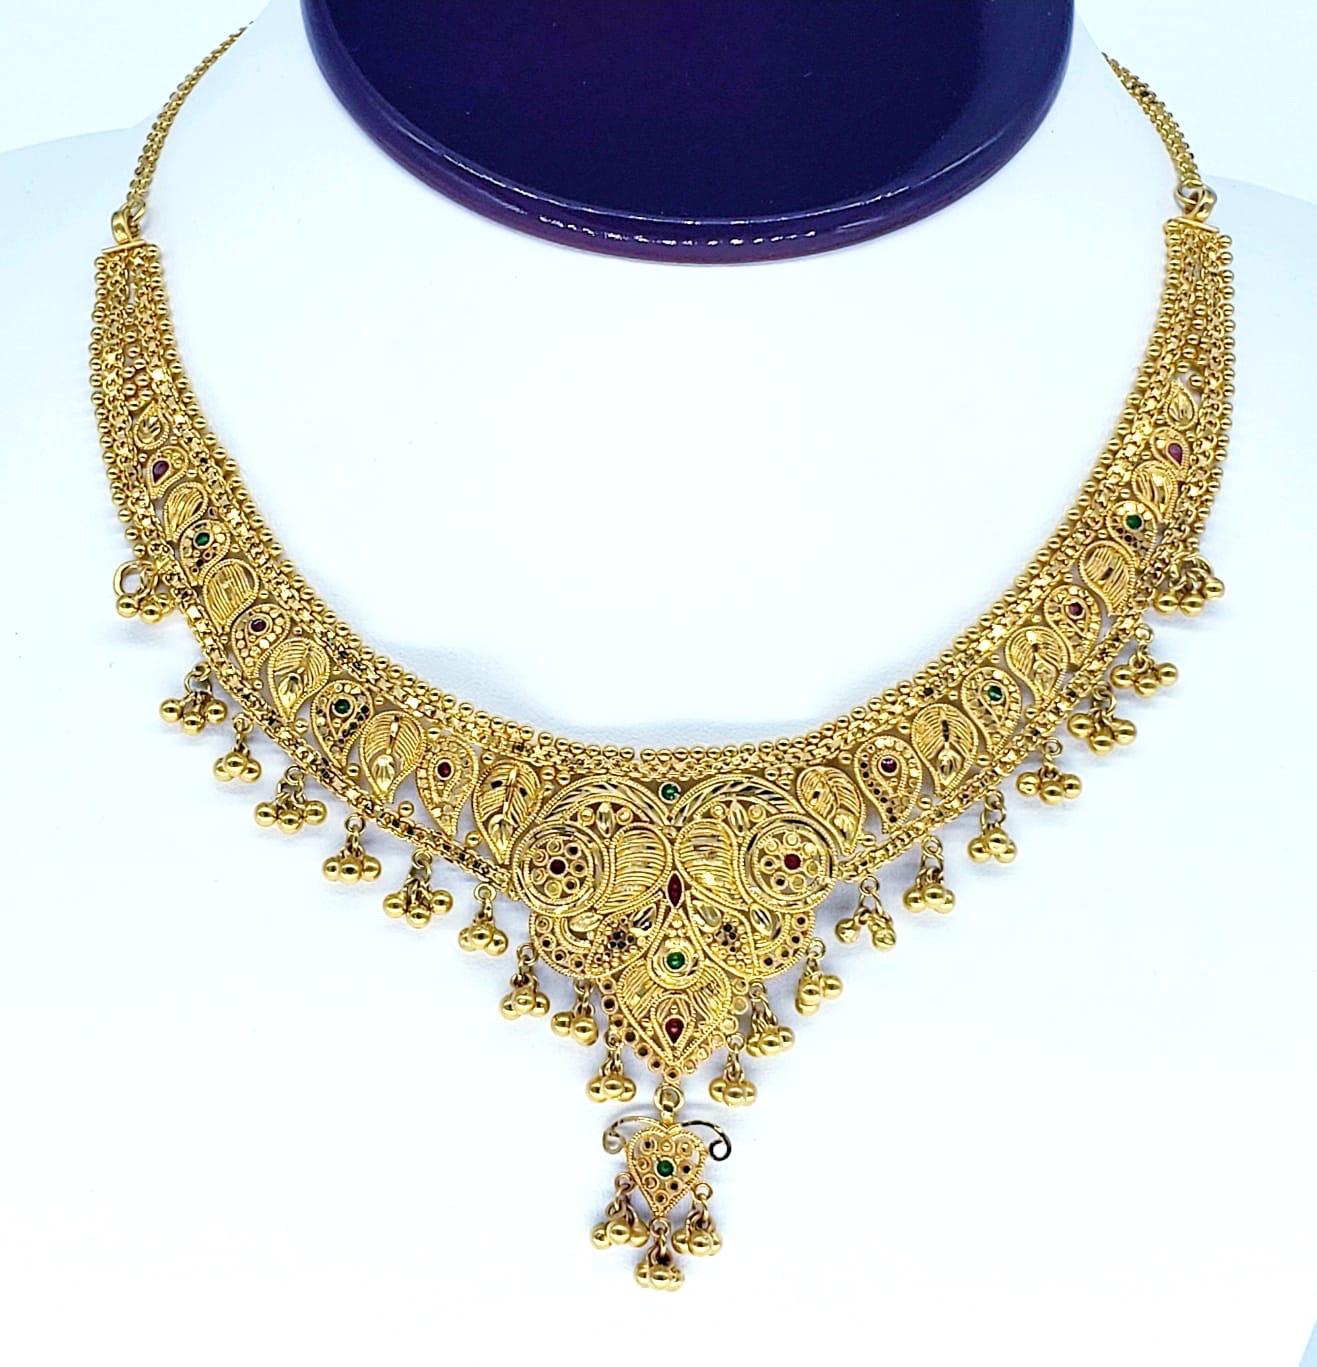 22k Traditional Royal Wedding Necklace. The necklace weights 35.7 grams 22k gold. The length is 16 inches and measures 6” By 2.5”